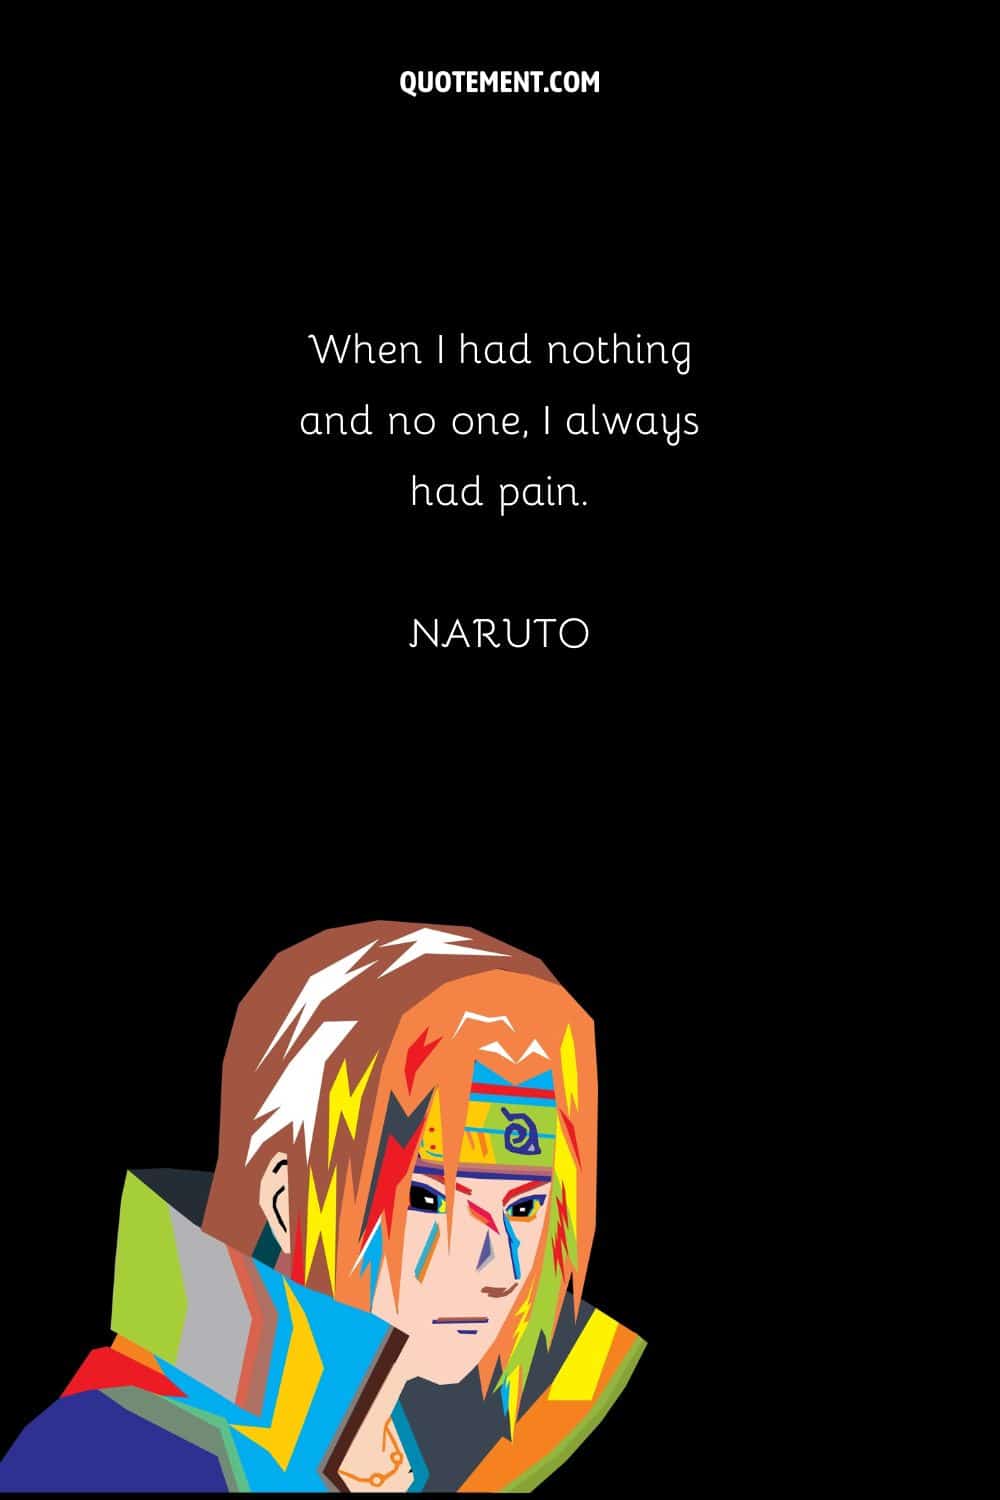 “When I had nothing and no one, I always had pain.” — Naruto